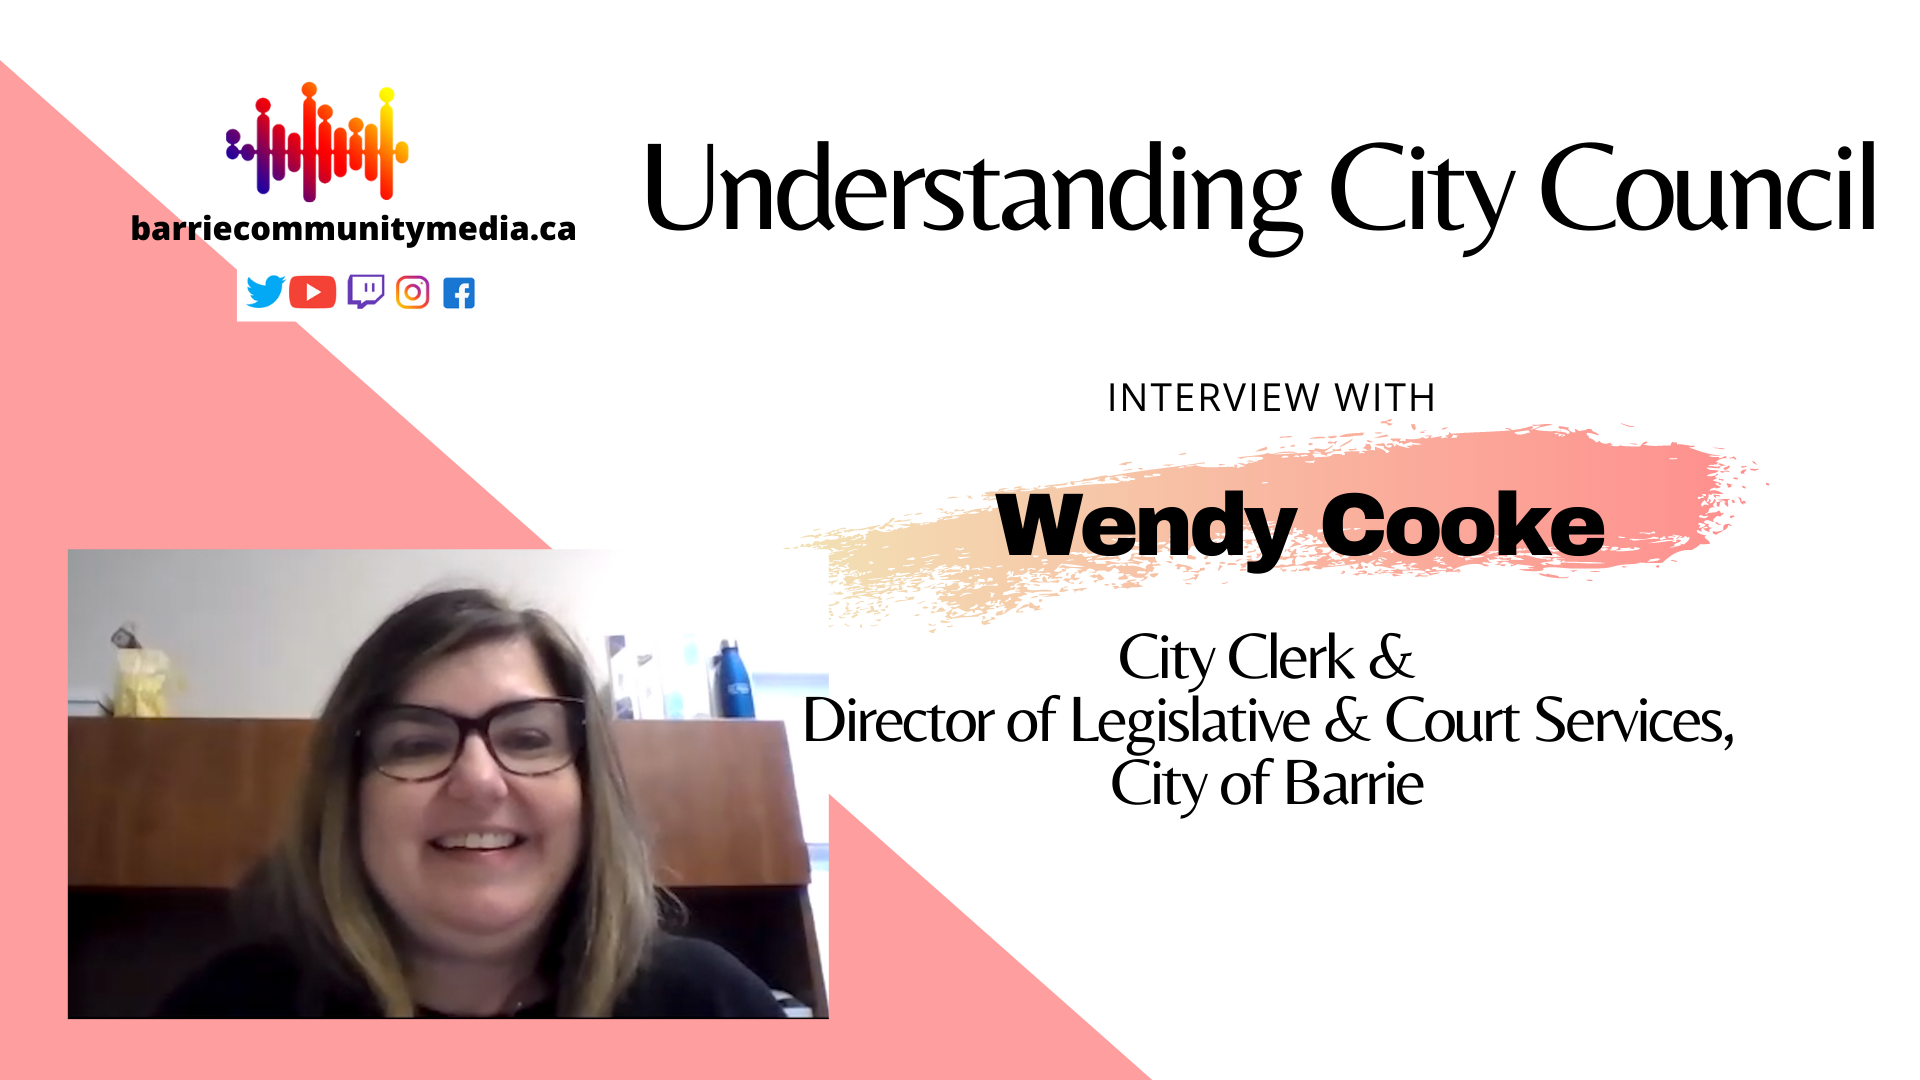 Understanding the city council with City Clerk Wendy Cooke